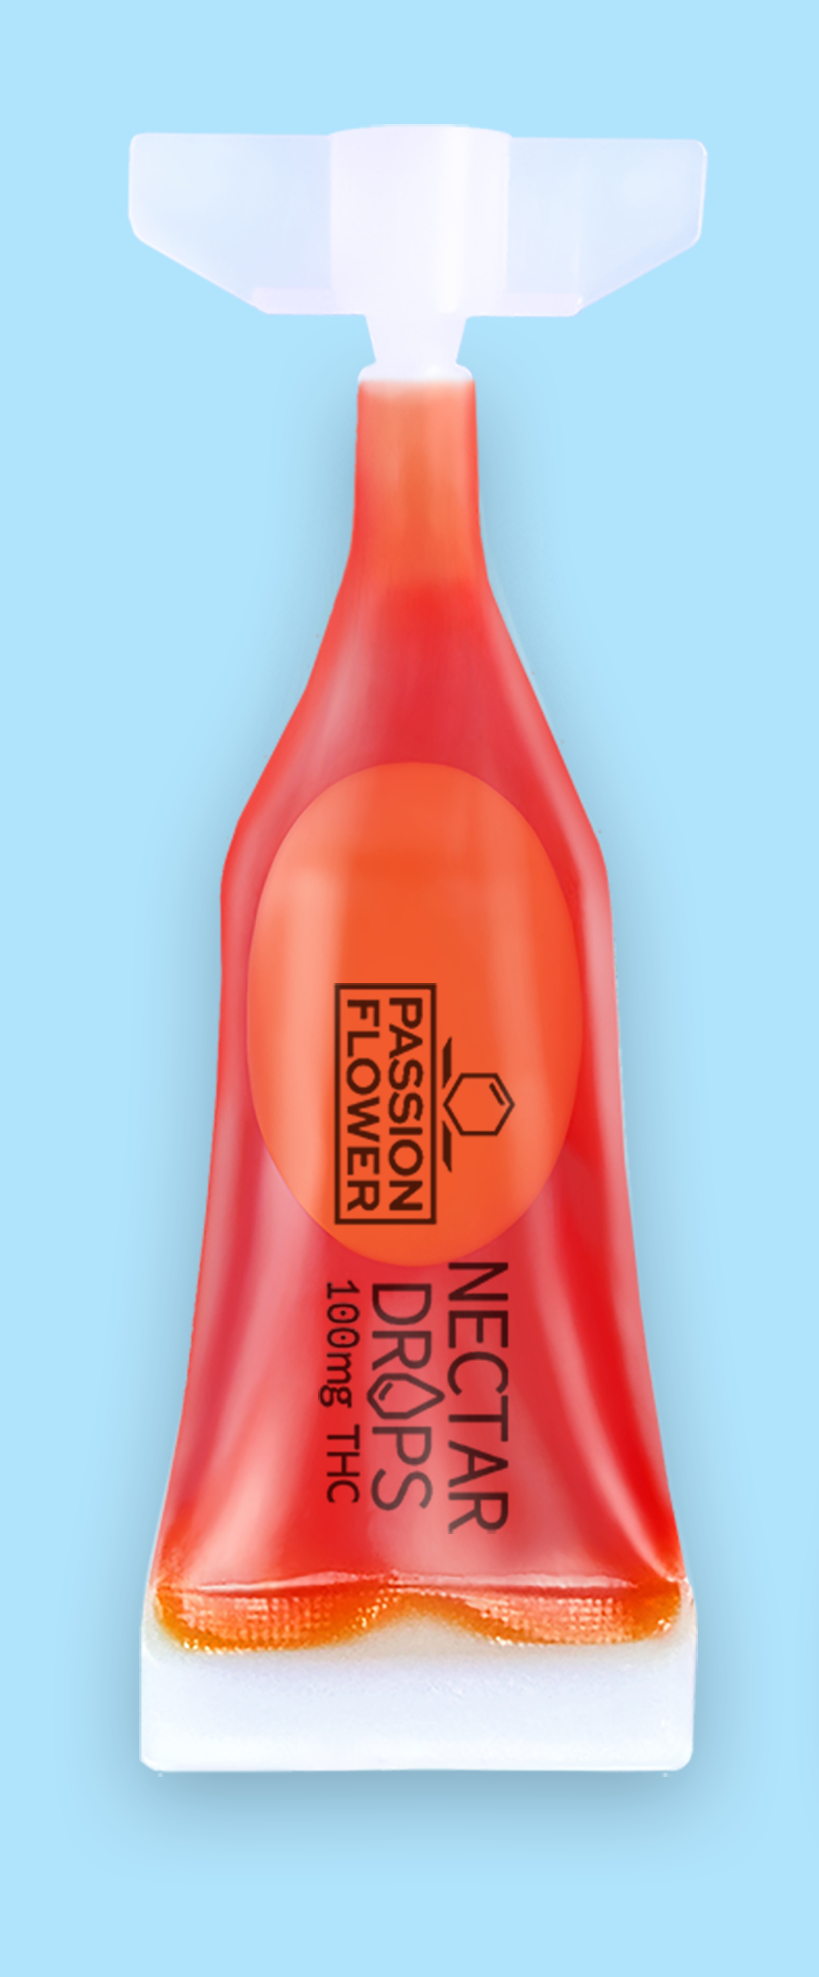 Passion Nectar Drops Strawberry